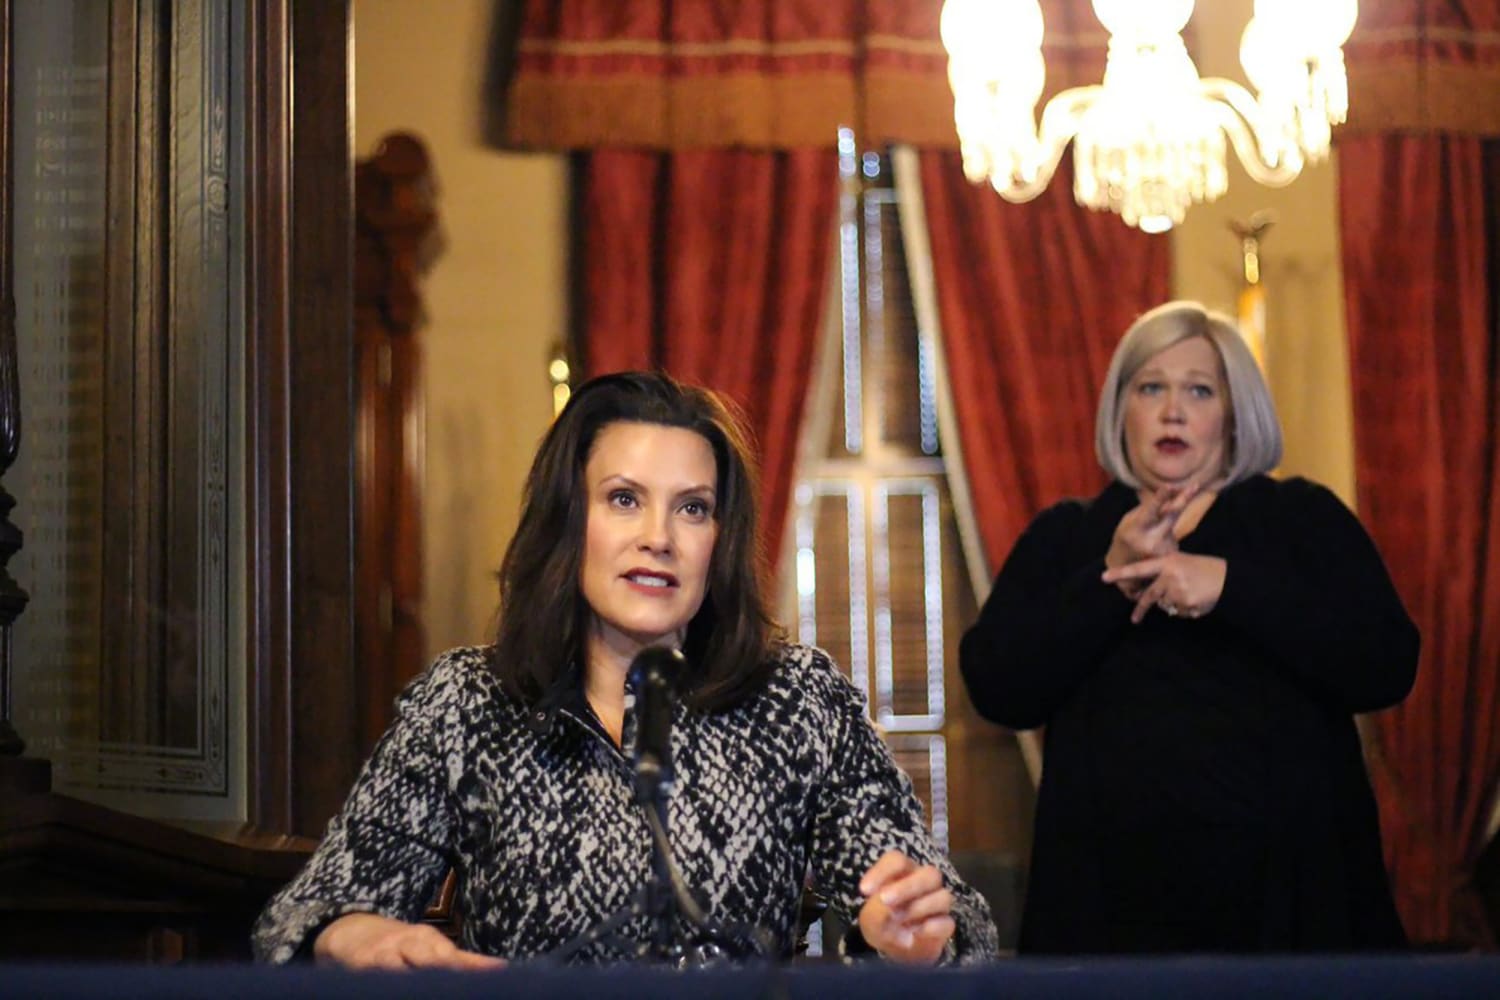 Michigan Gov. Whitmer faces fierce backlash over strict stay-at ...